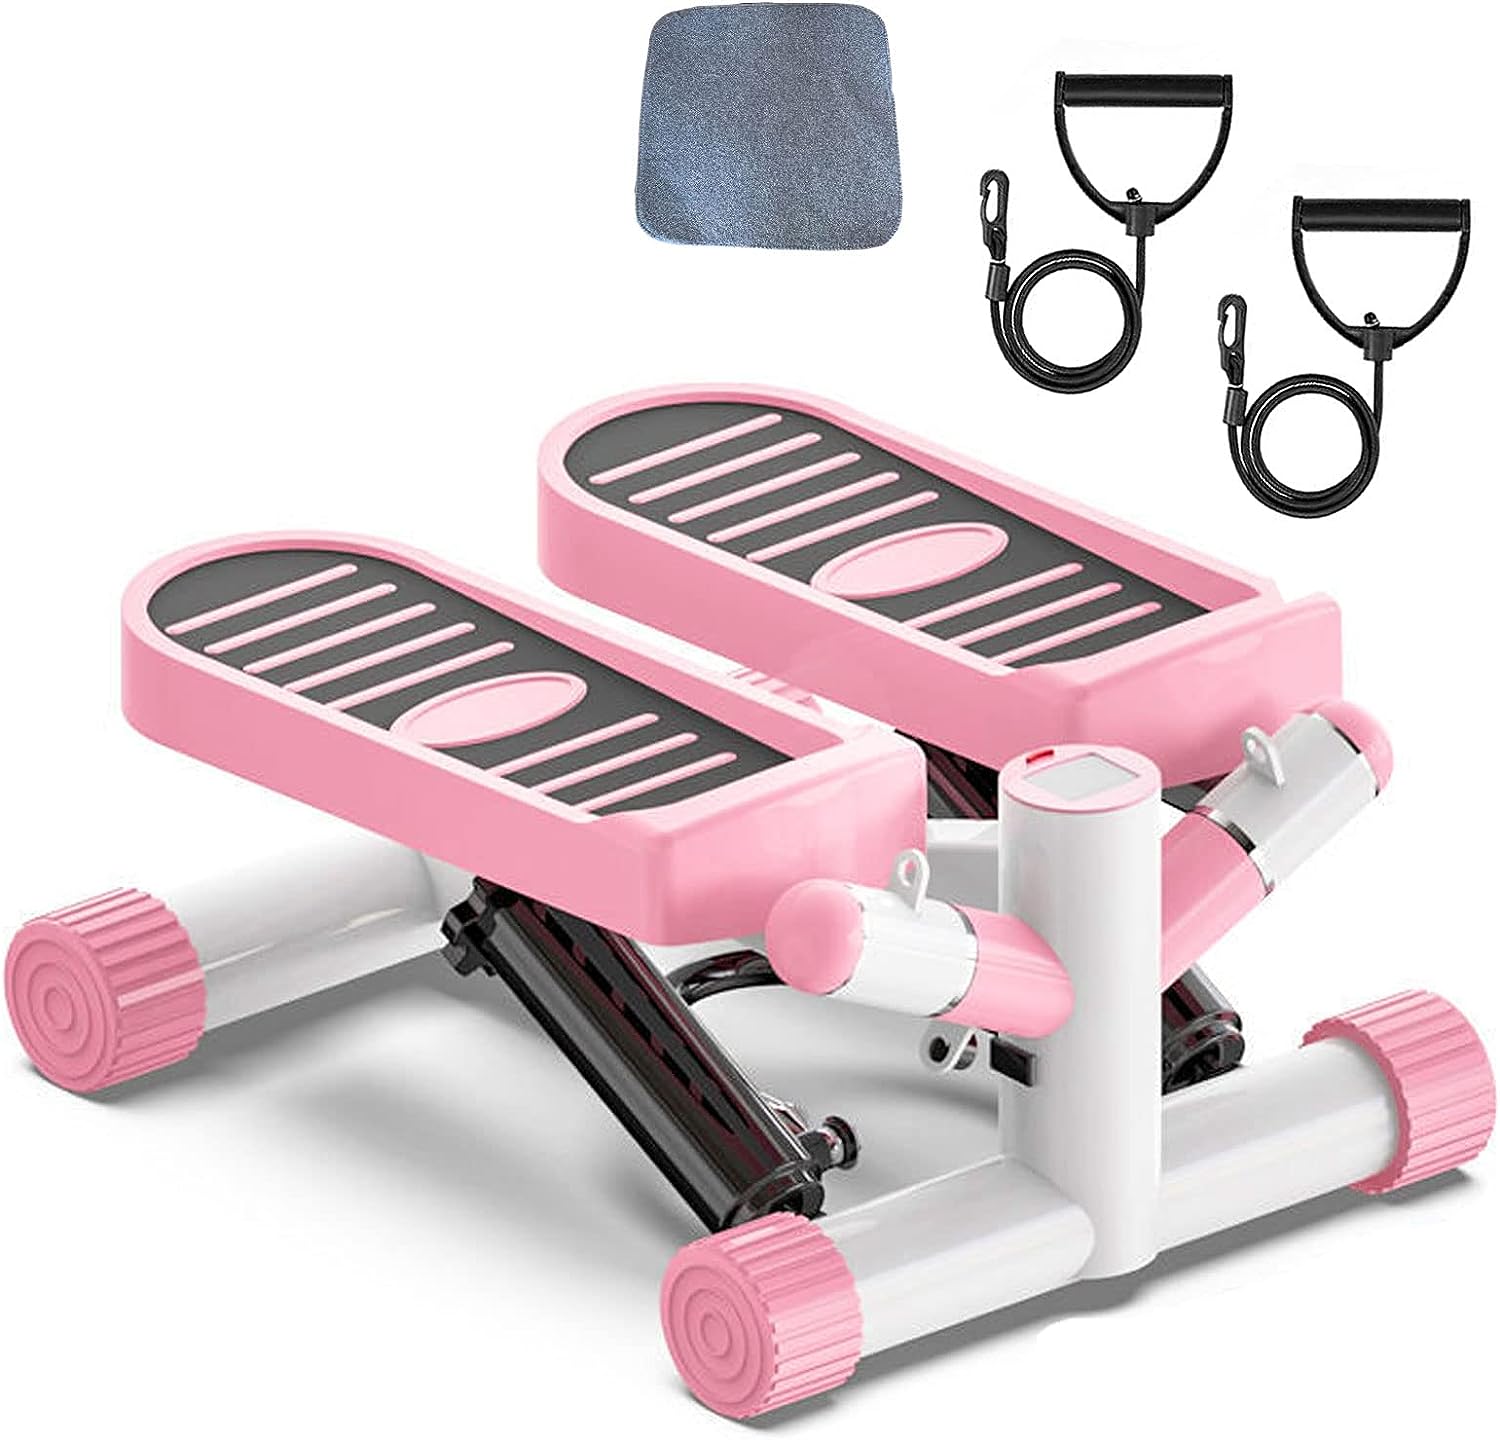 Ganggend Exercise Stepping Machine Review